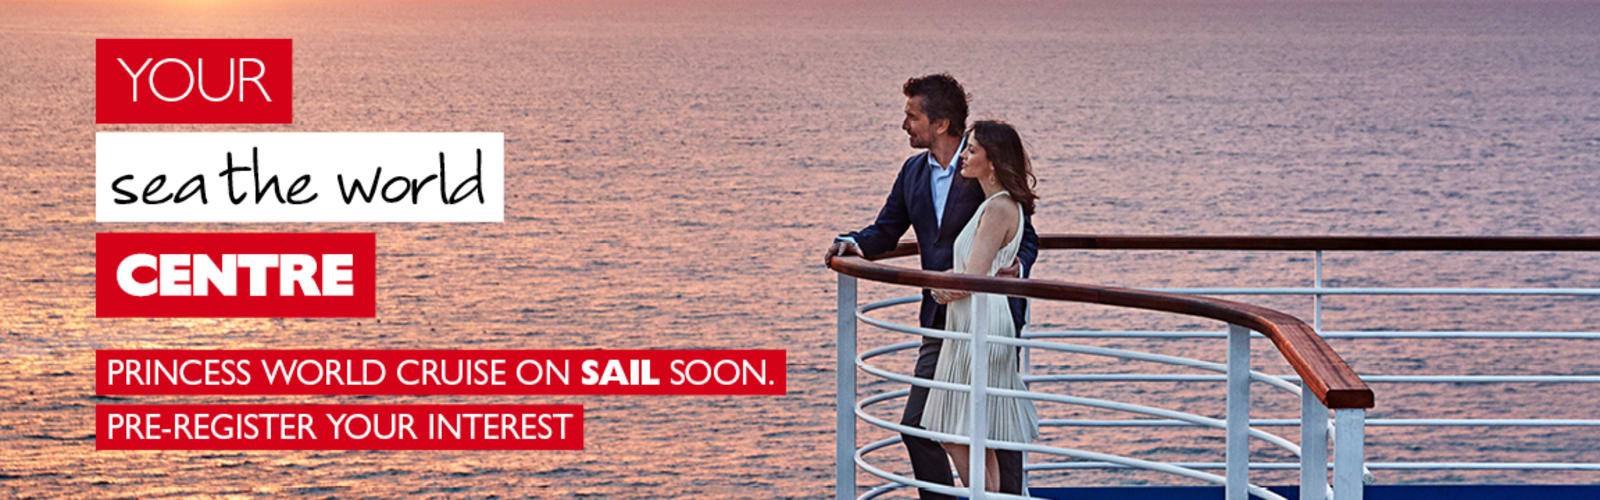 Your sea the world centre - Princess world cruise on sail soon. Pre-register your interest. Couple on the side of a cruise ship at sunset